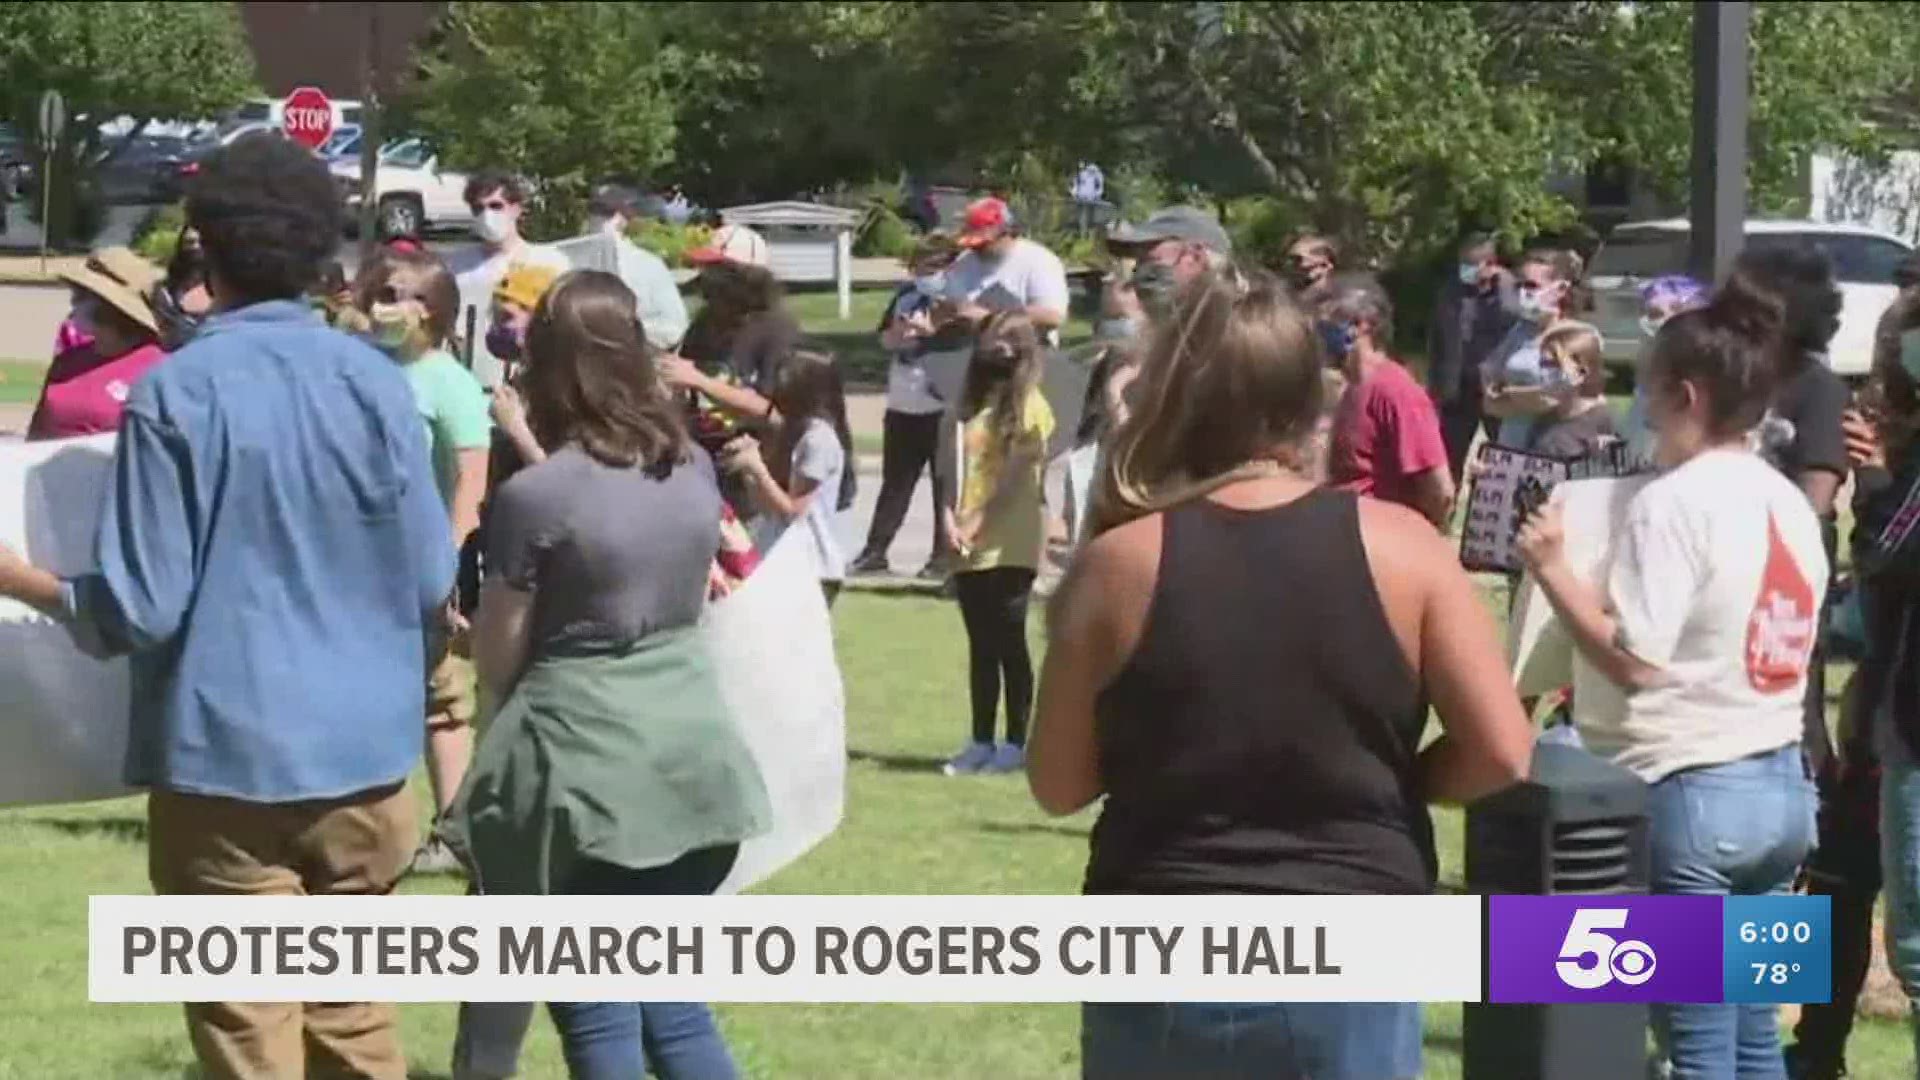 Protesters march to Rogers City Hall